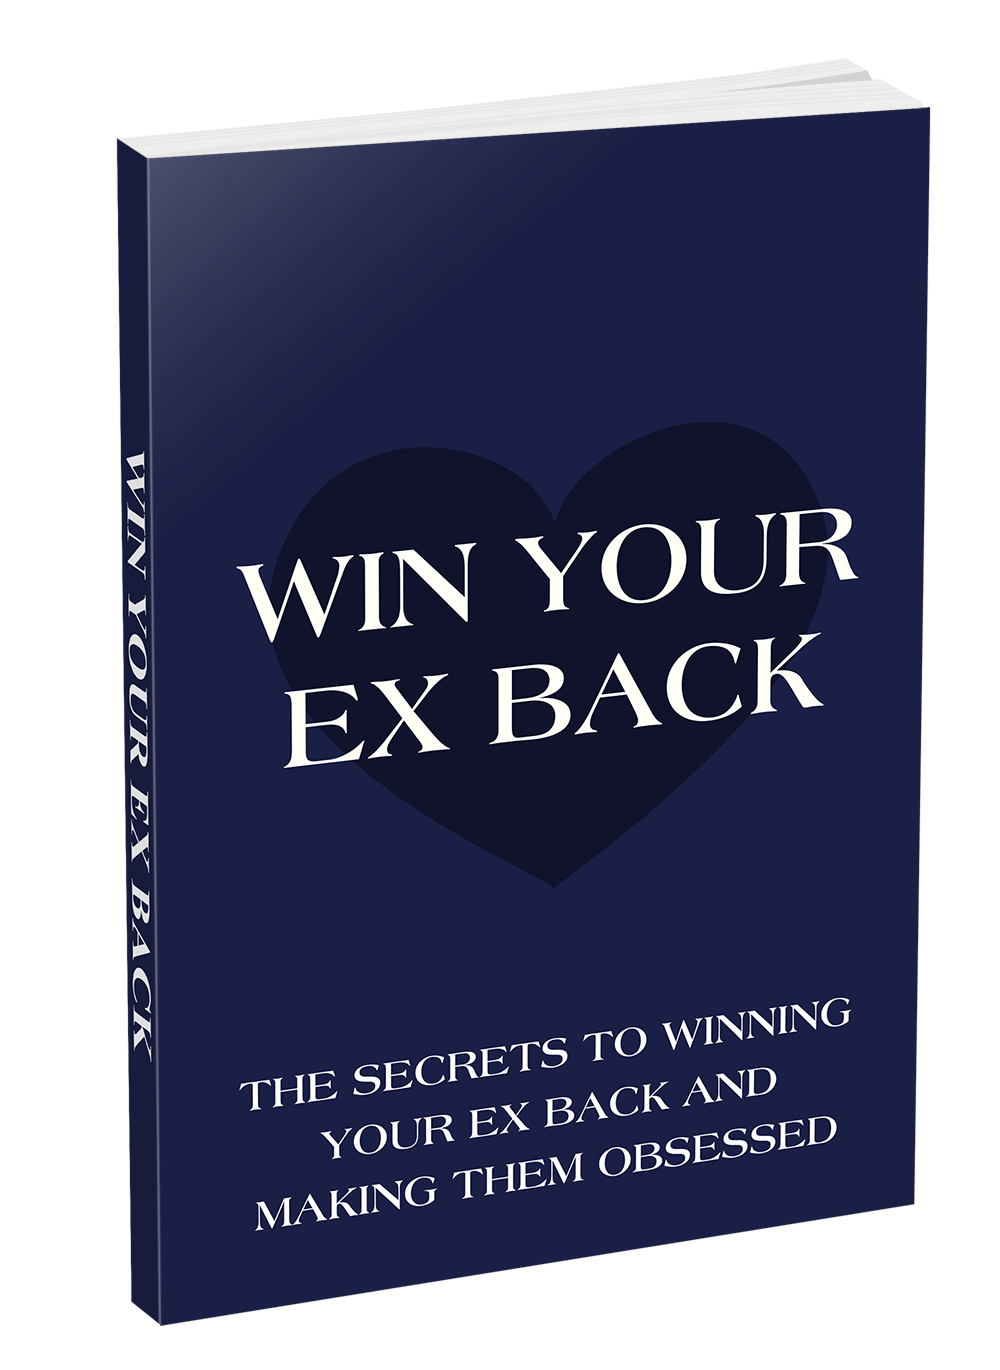 The Secrets to Winning Your Ex Back